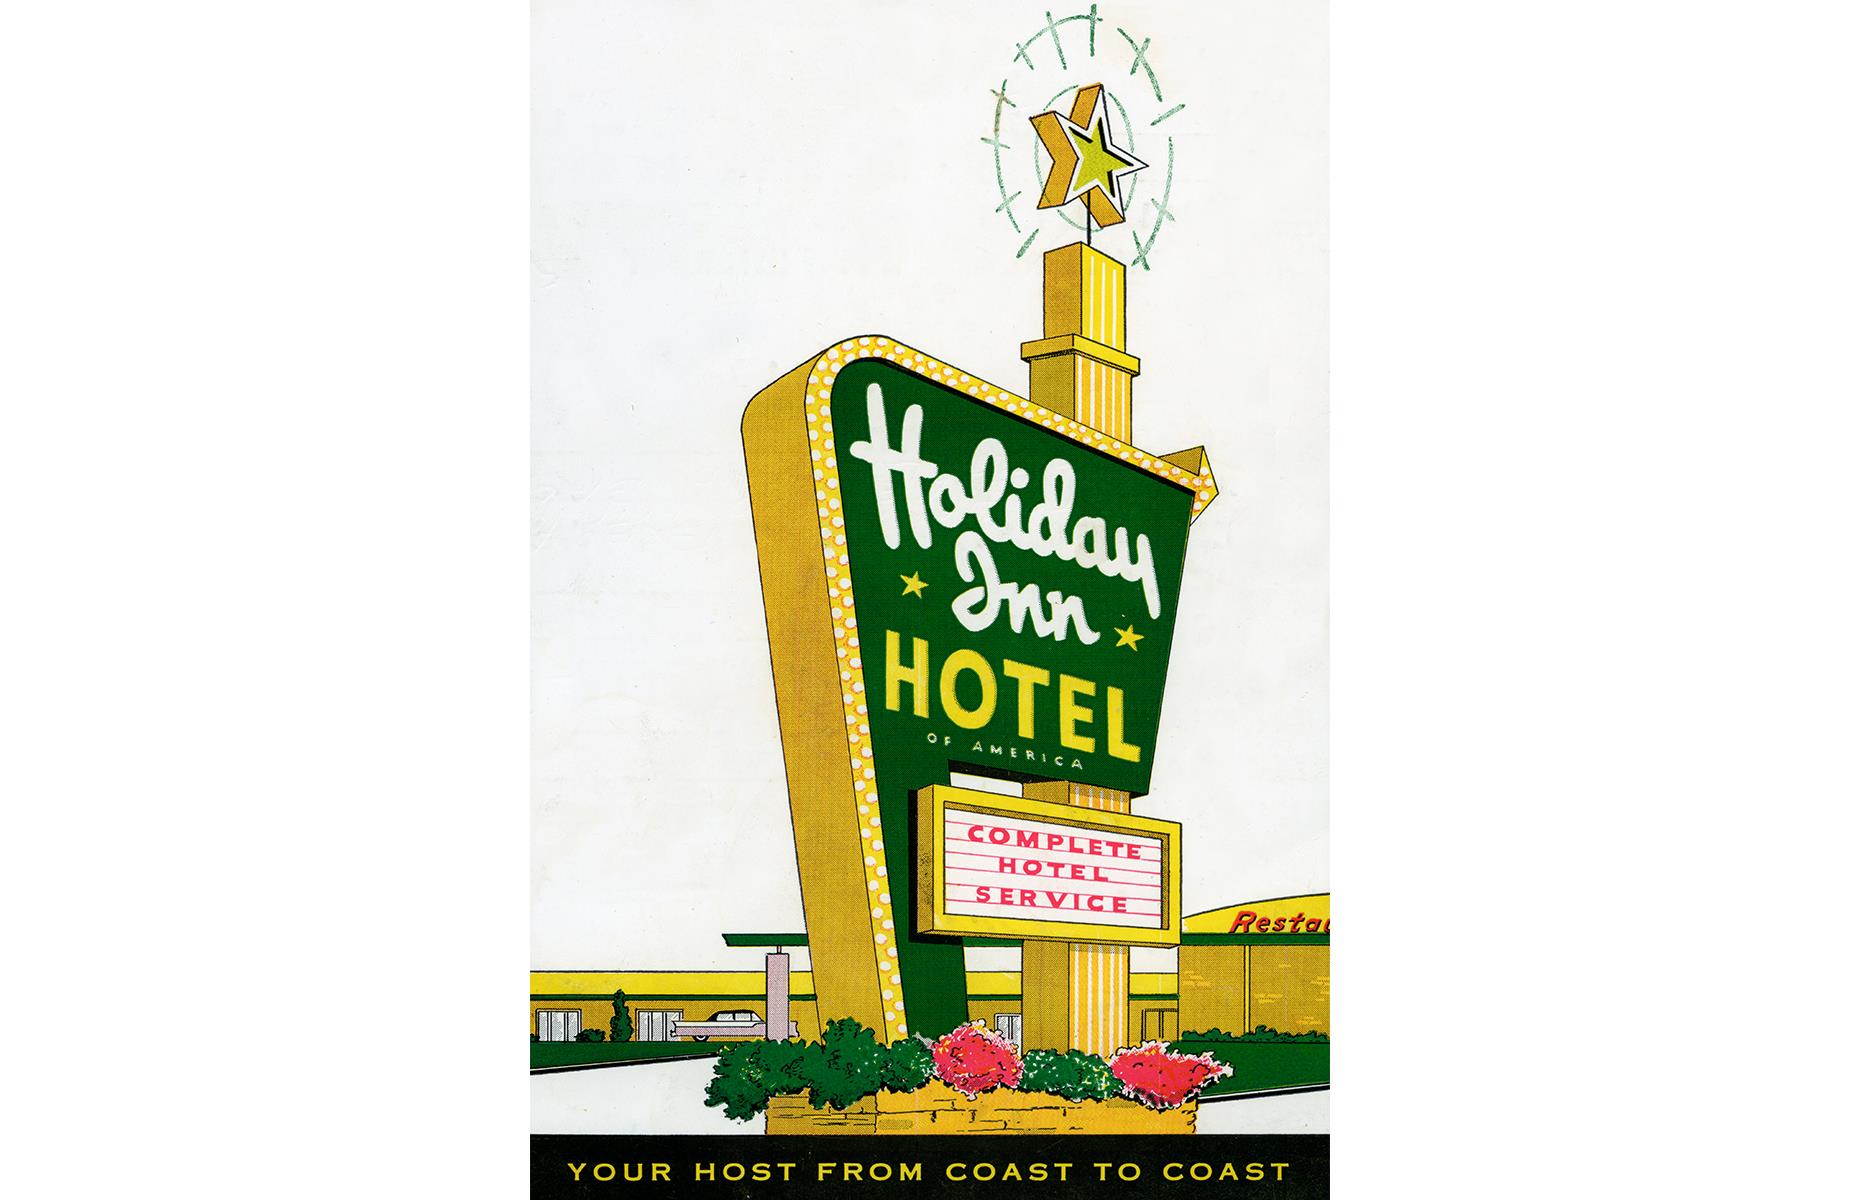 <p>The Holiday Inn looks mighty inviting in this retro ad from 1957. The chain was established as a string of motels back in the Fifties and it soon burgeoned across America and eventually beyond. The brand is advertised here in the early days with a bright sign and the welcoming slogan "your host from coast to coast". </p>  <p><a href="https://www.loveexploring.com/galleries/102556/the-worlds-most-historic-hotels?page=1"><strong>Now take a look at the world's most historic hotels</strong></a></p>